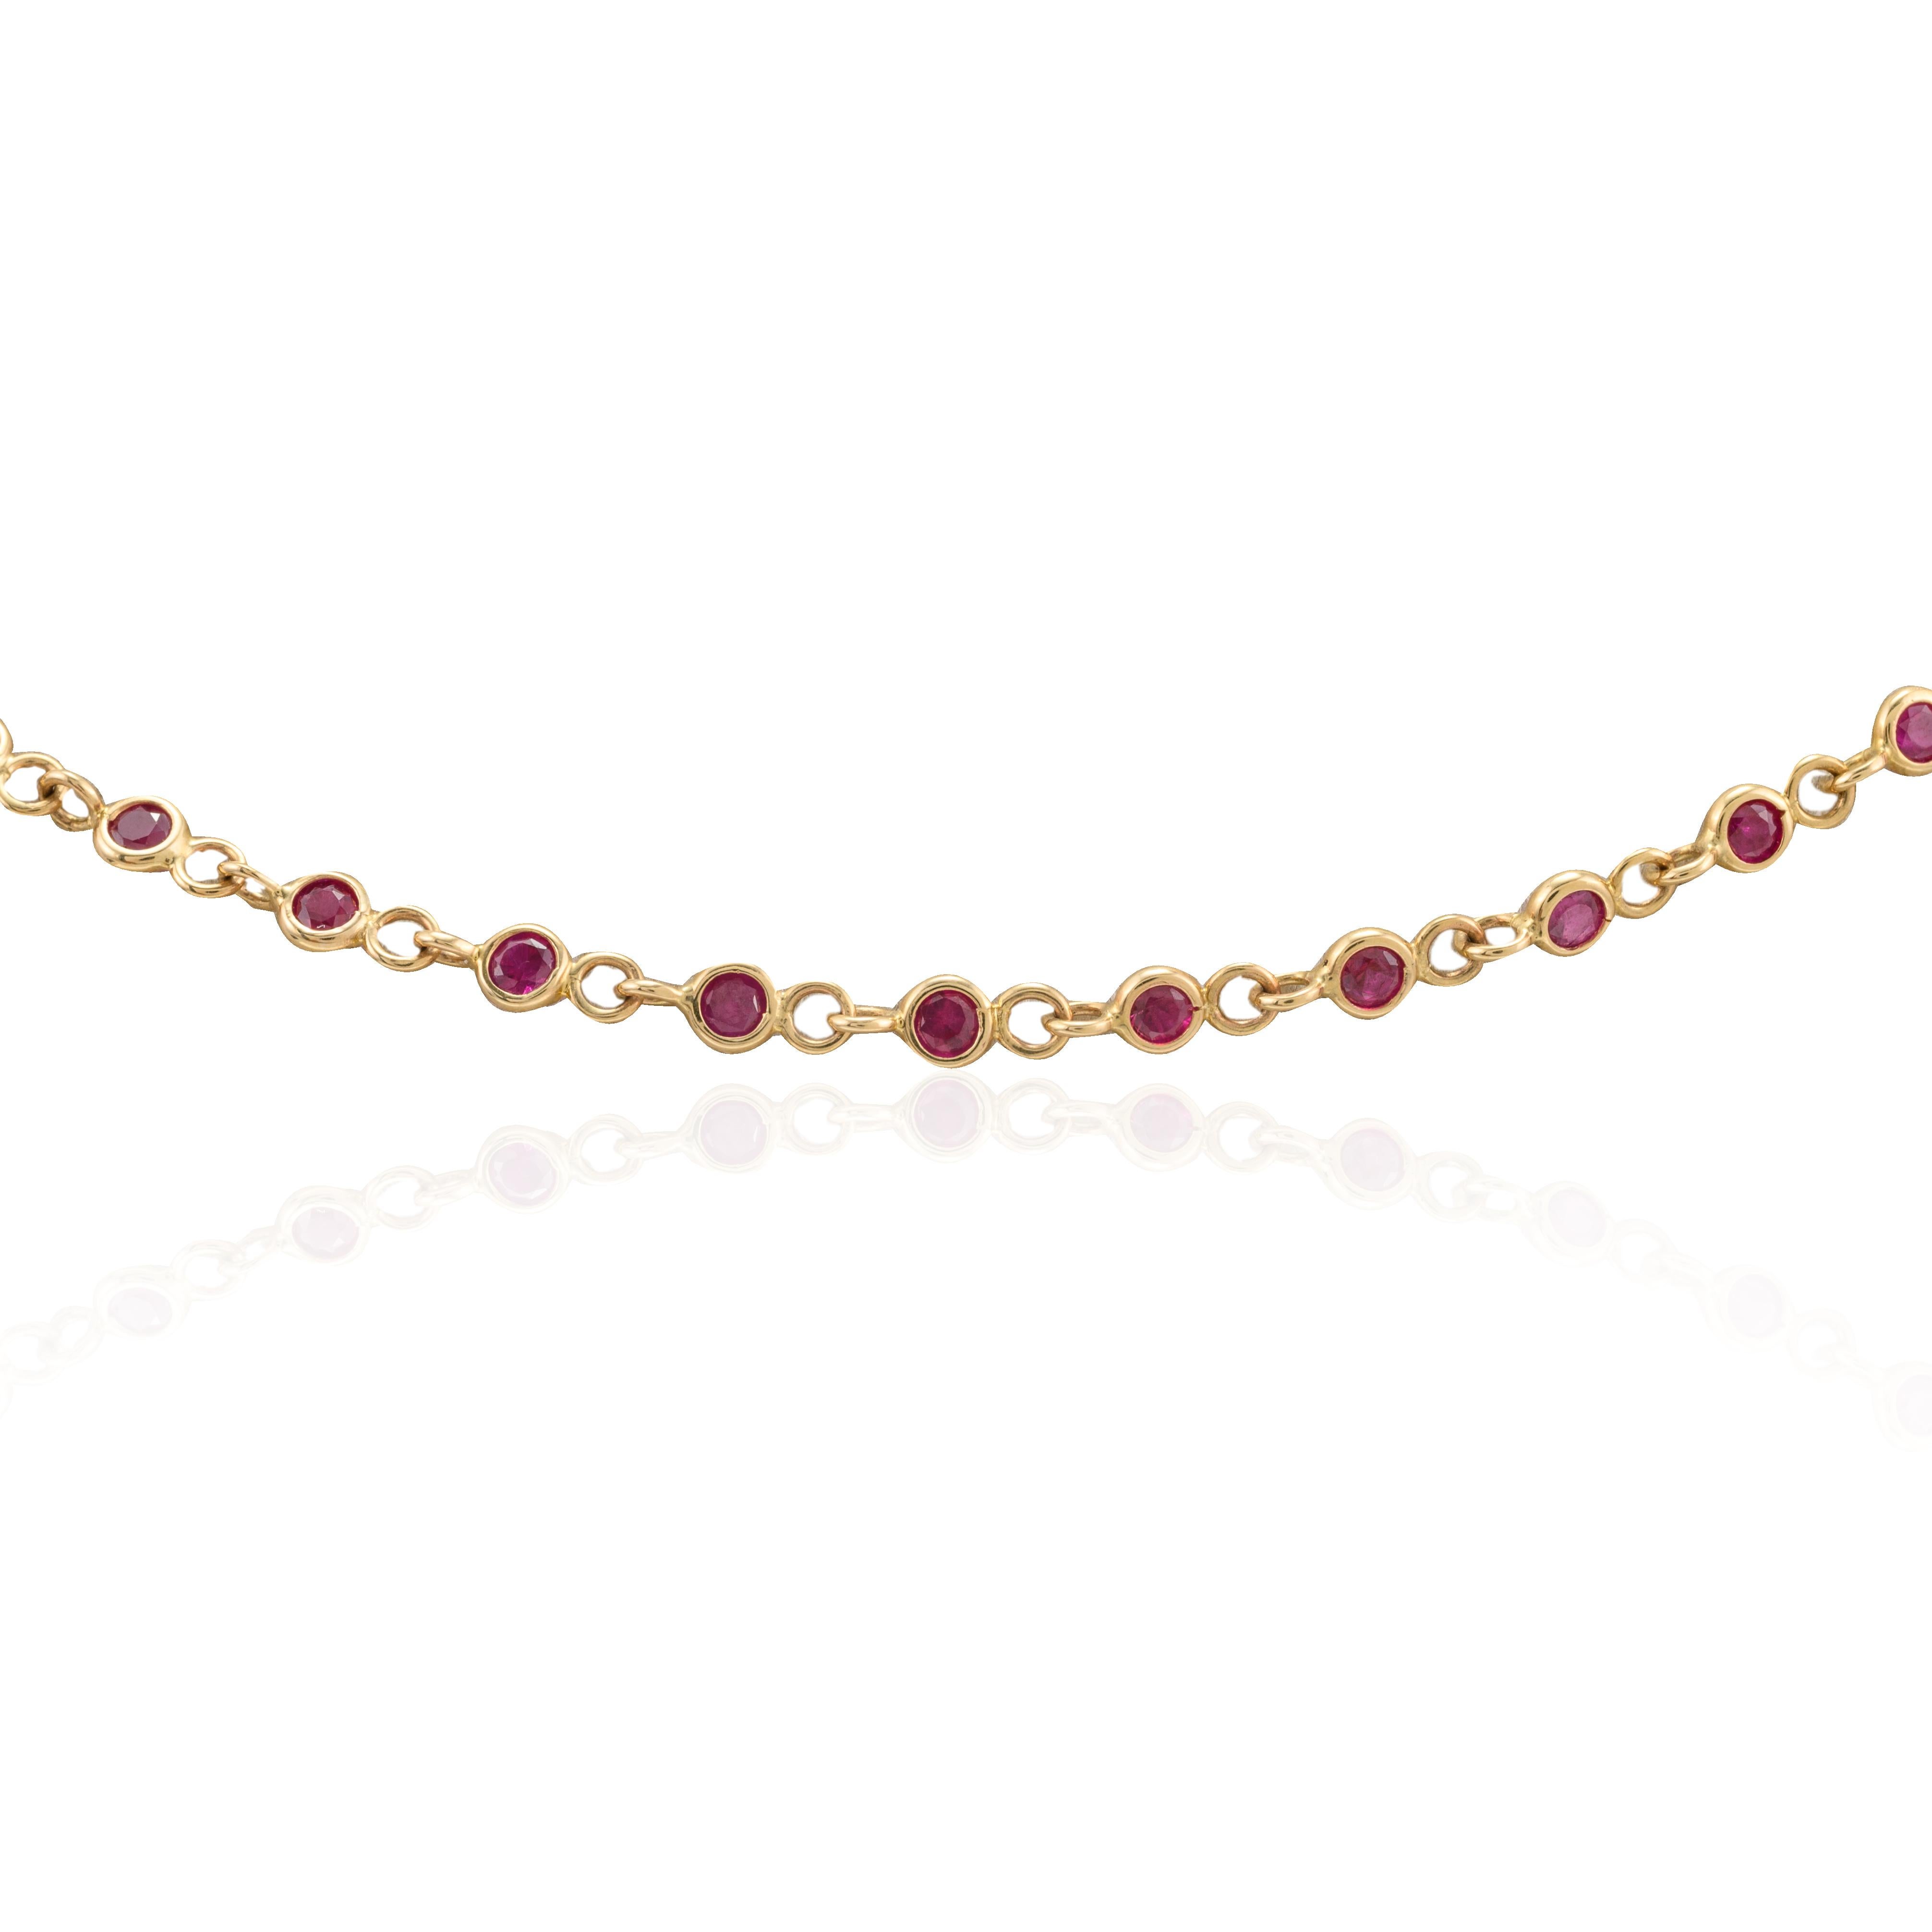 Handmade Ruby Station Chain Necklace 14k Yellow Gold, Grandma Gift Christmas In New Condition For Sale In Houston, TX